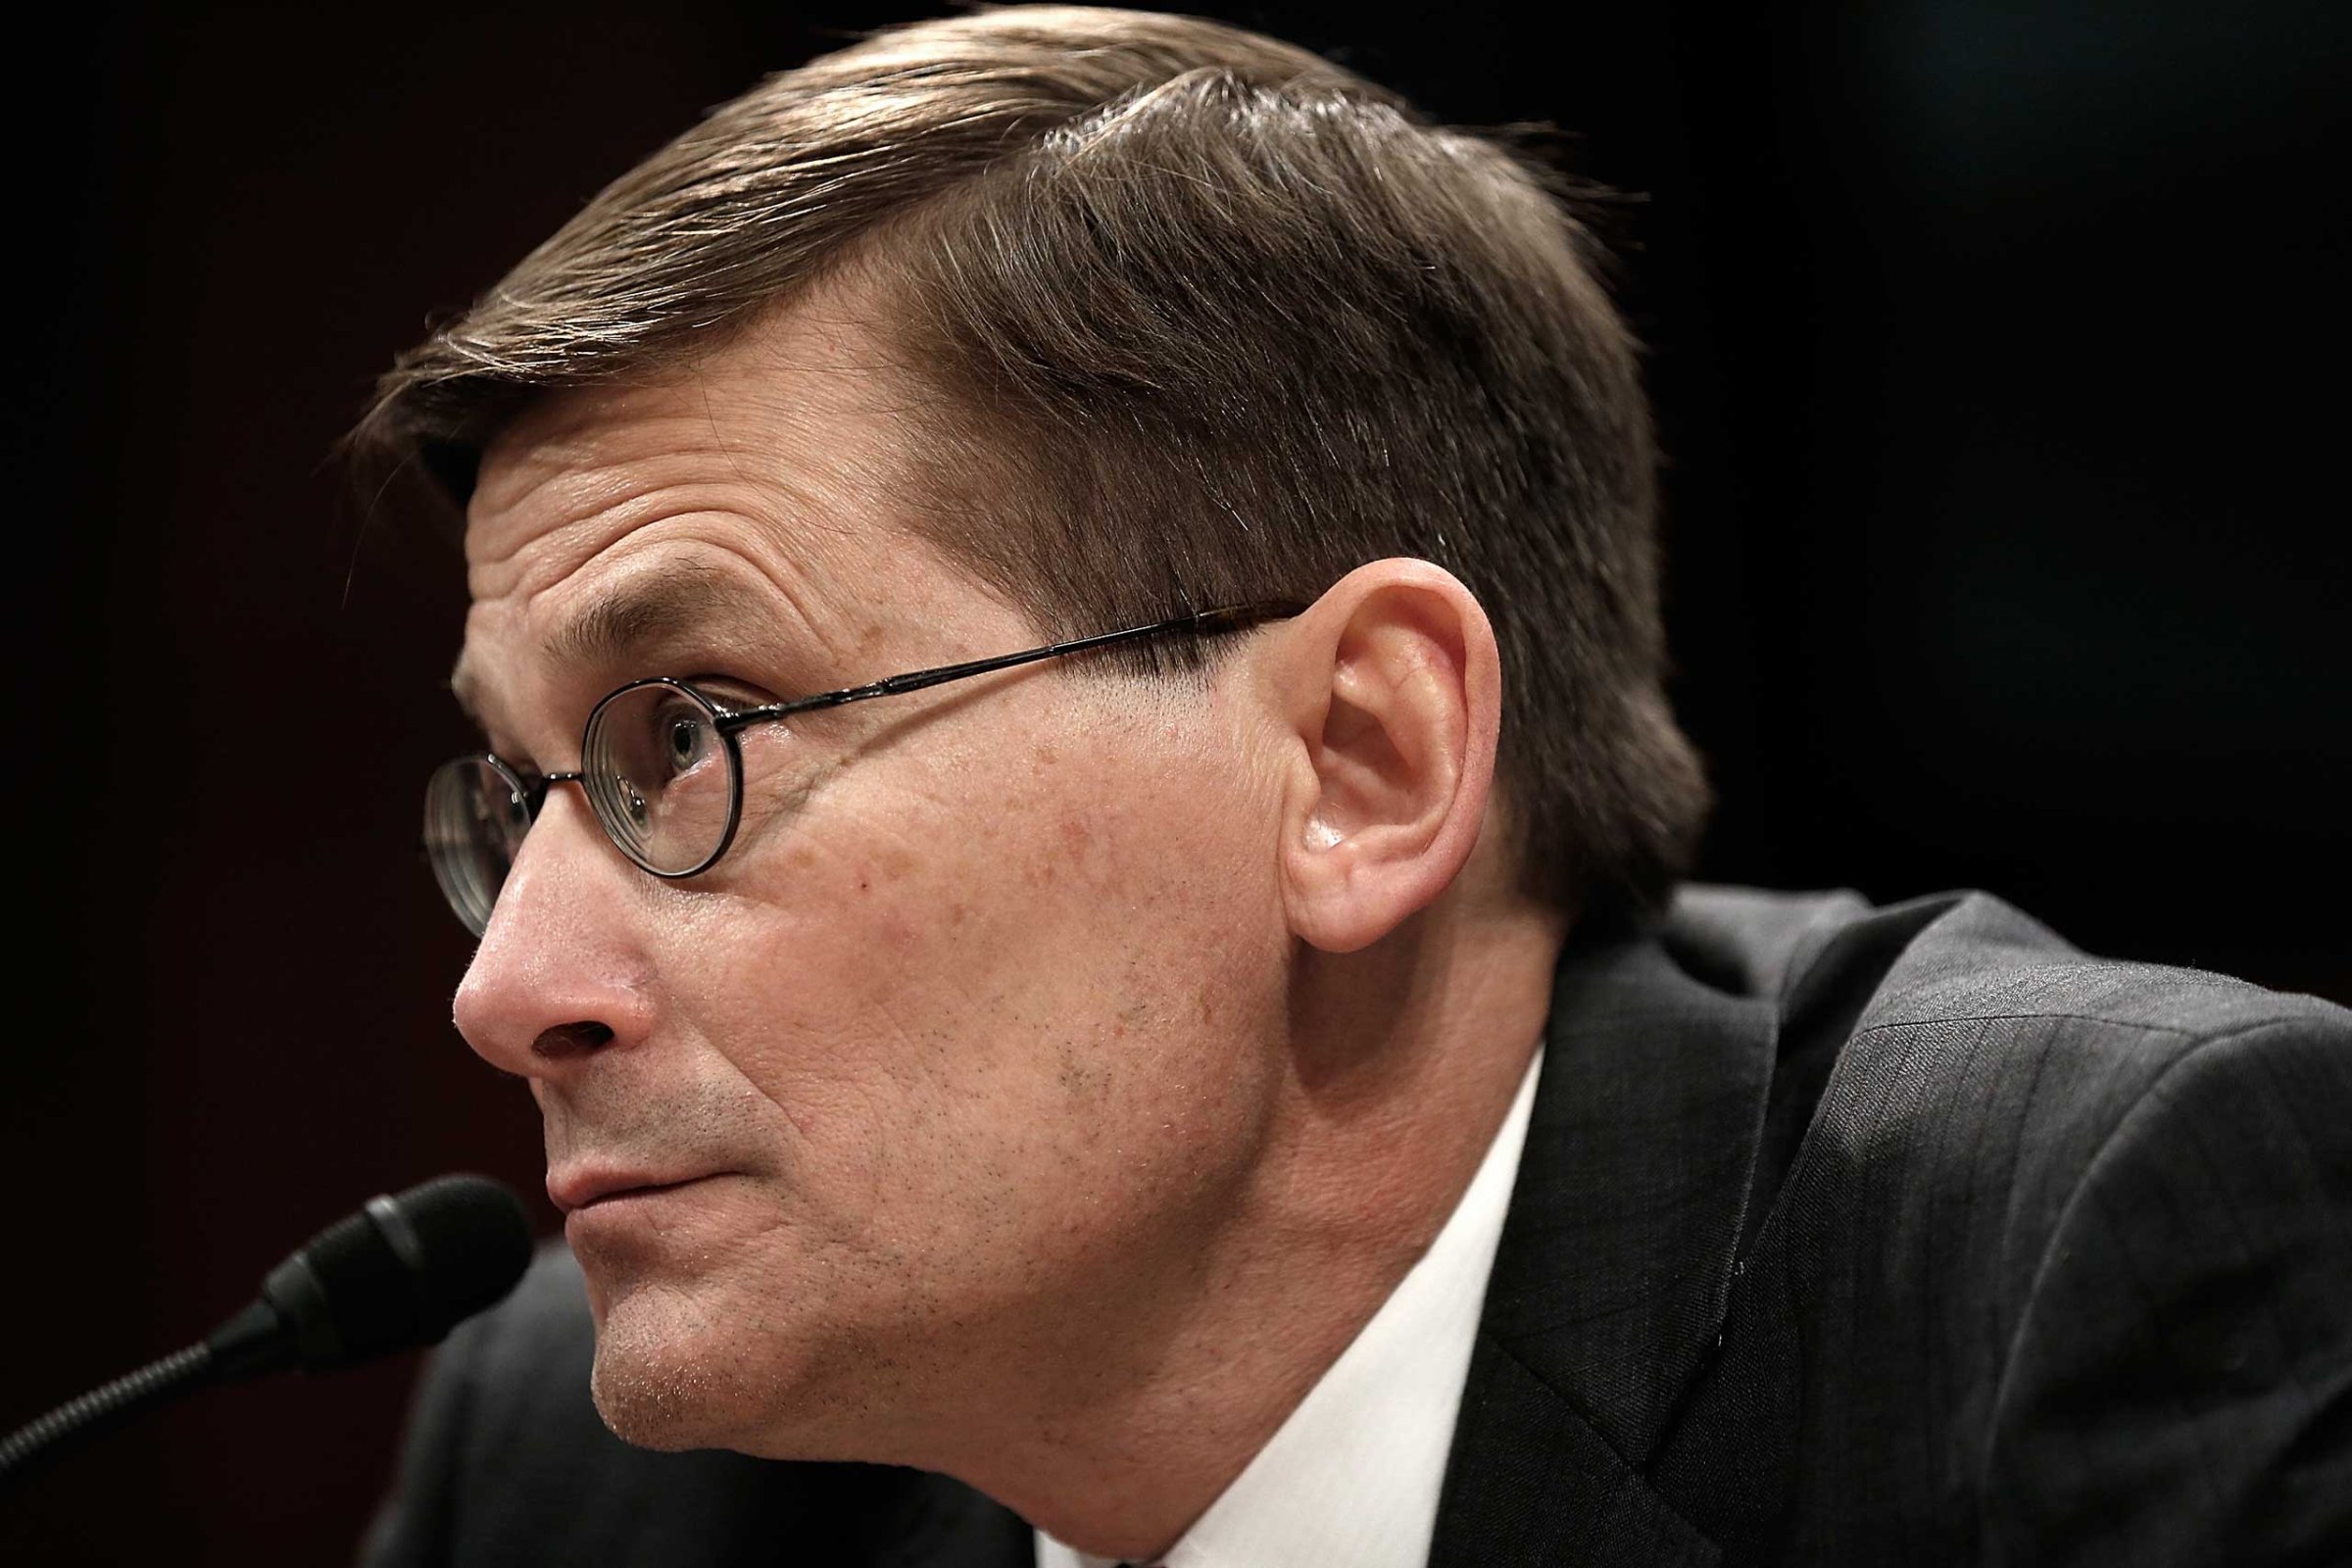 Former Deputy CIA Director Michael Morell testifies before the House Select Intelligence Committee April 2, 2014 in Washington, DC.